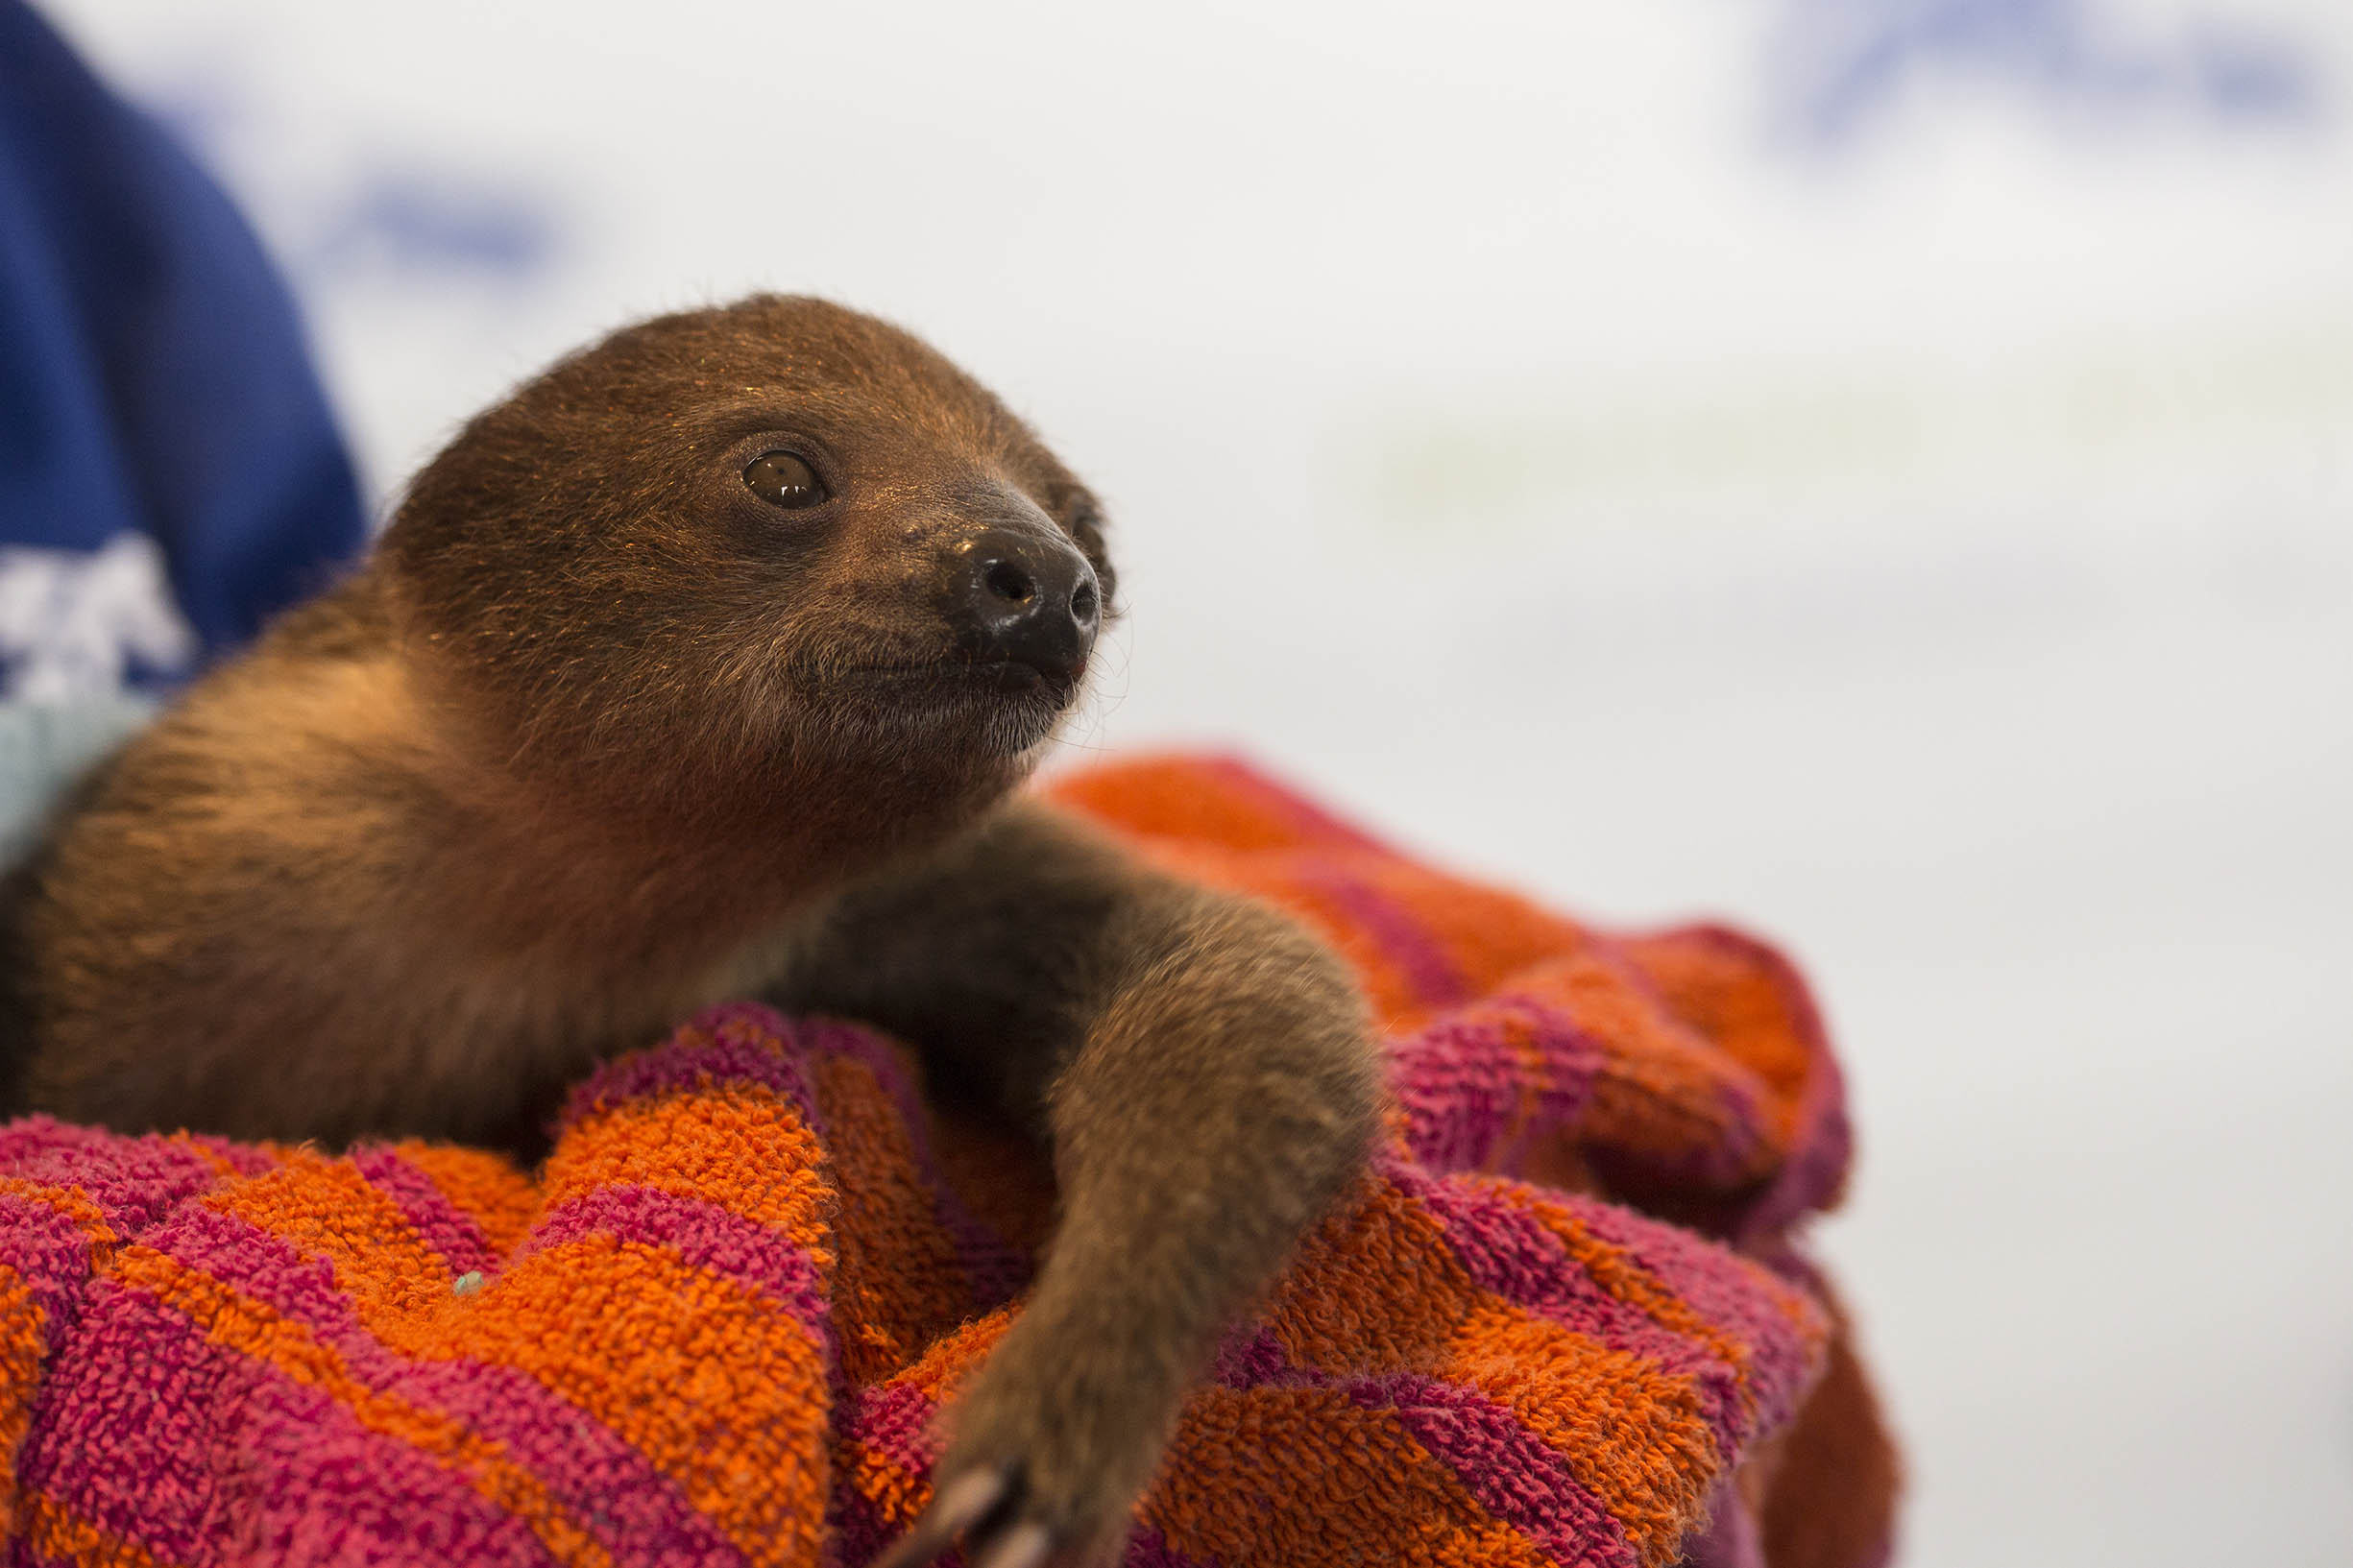 PHOTO:A baby sloth was flown on a private jet from Florida on Feb. 8, 2016 to his new home at the National Aviary in Pittsburgh. 